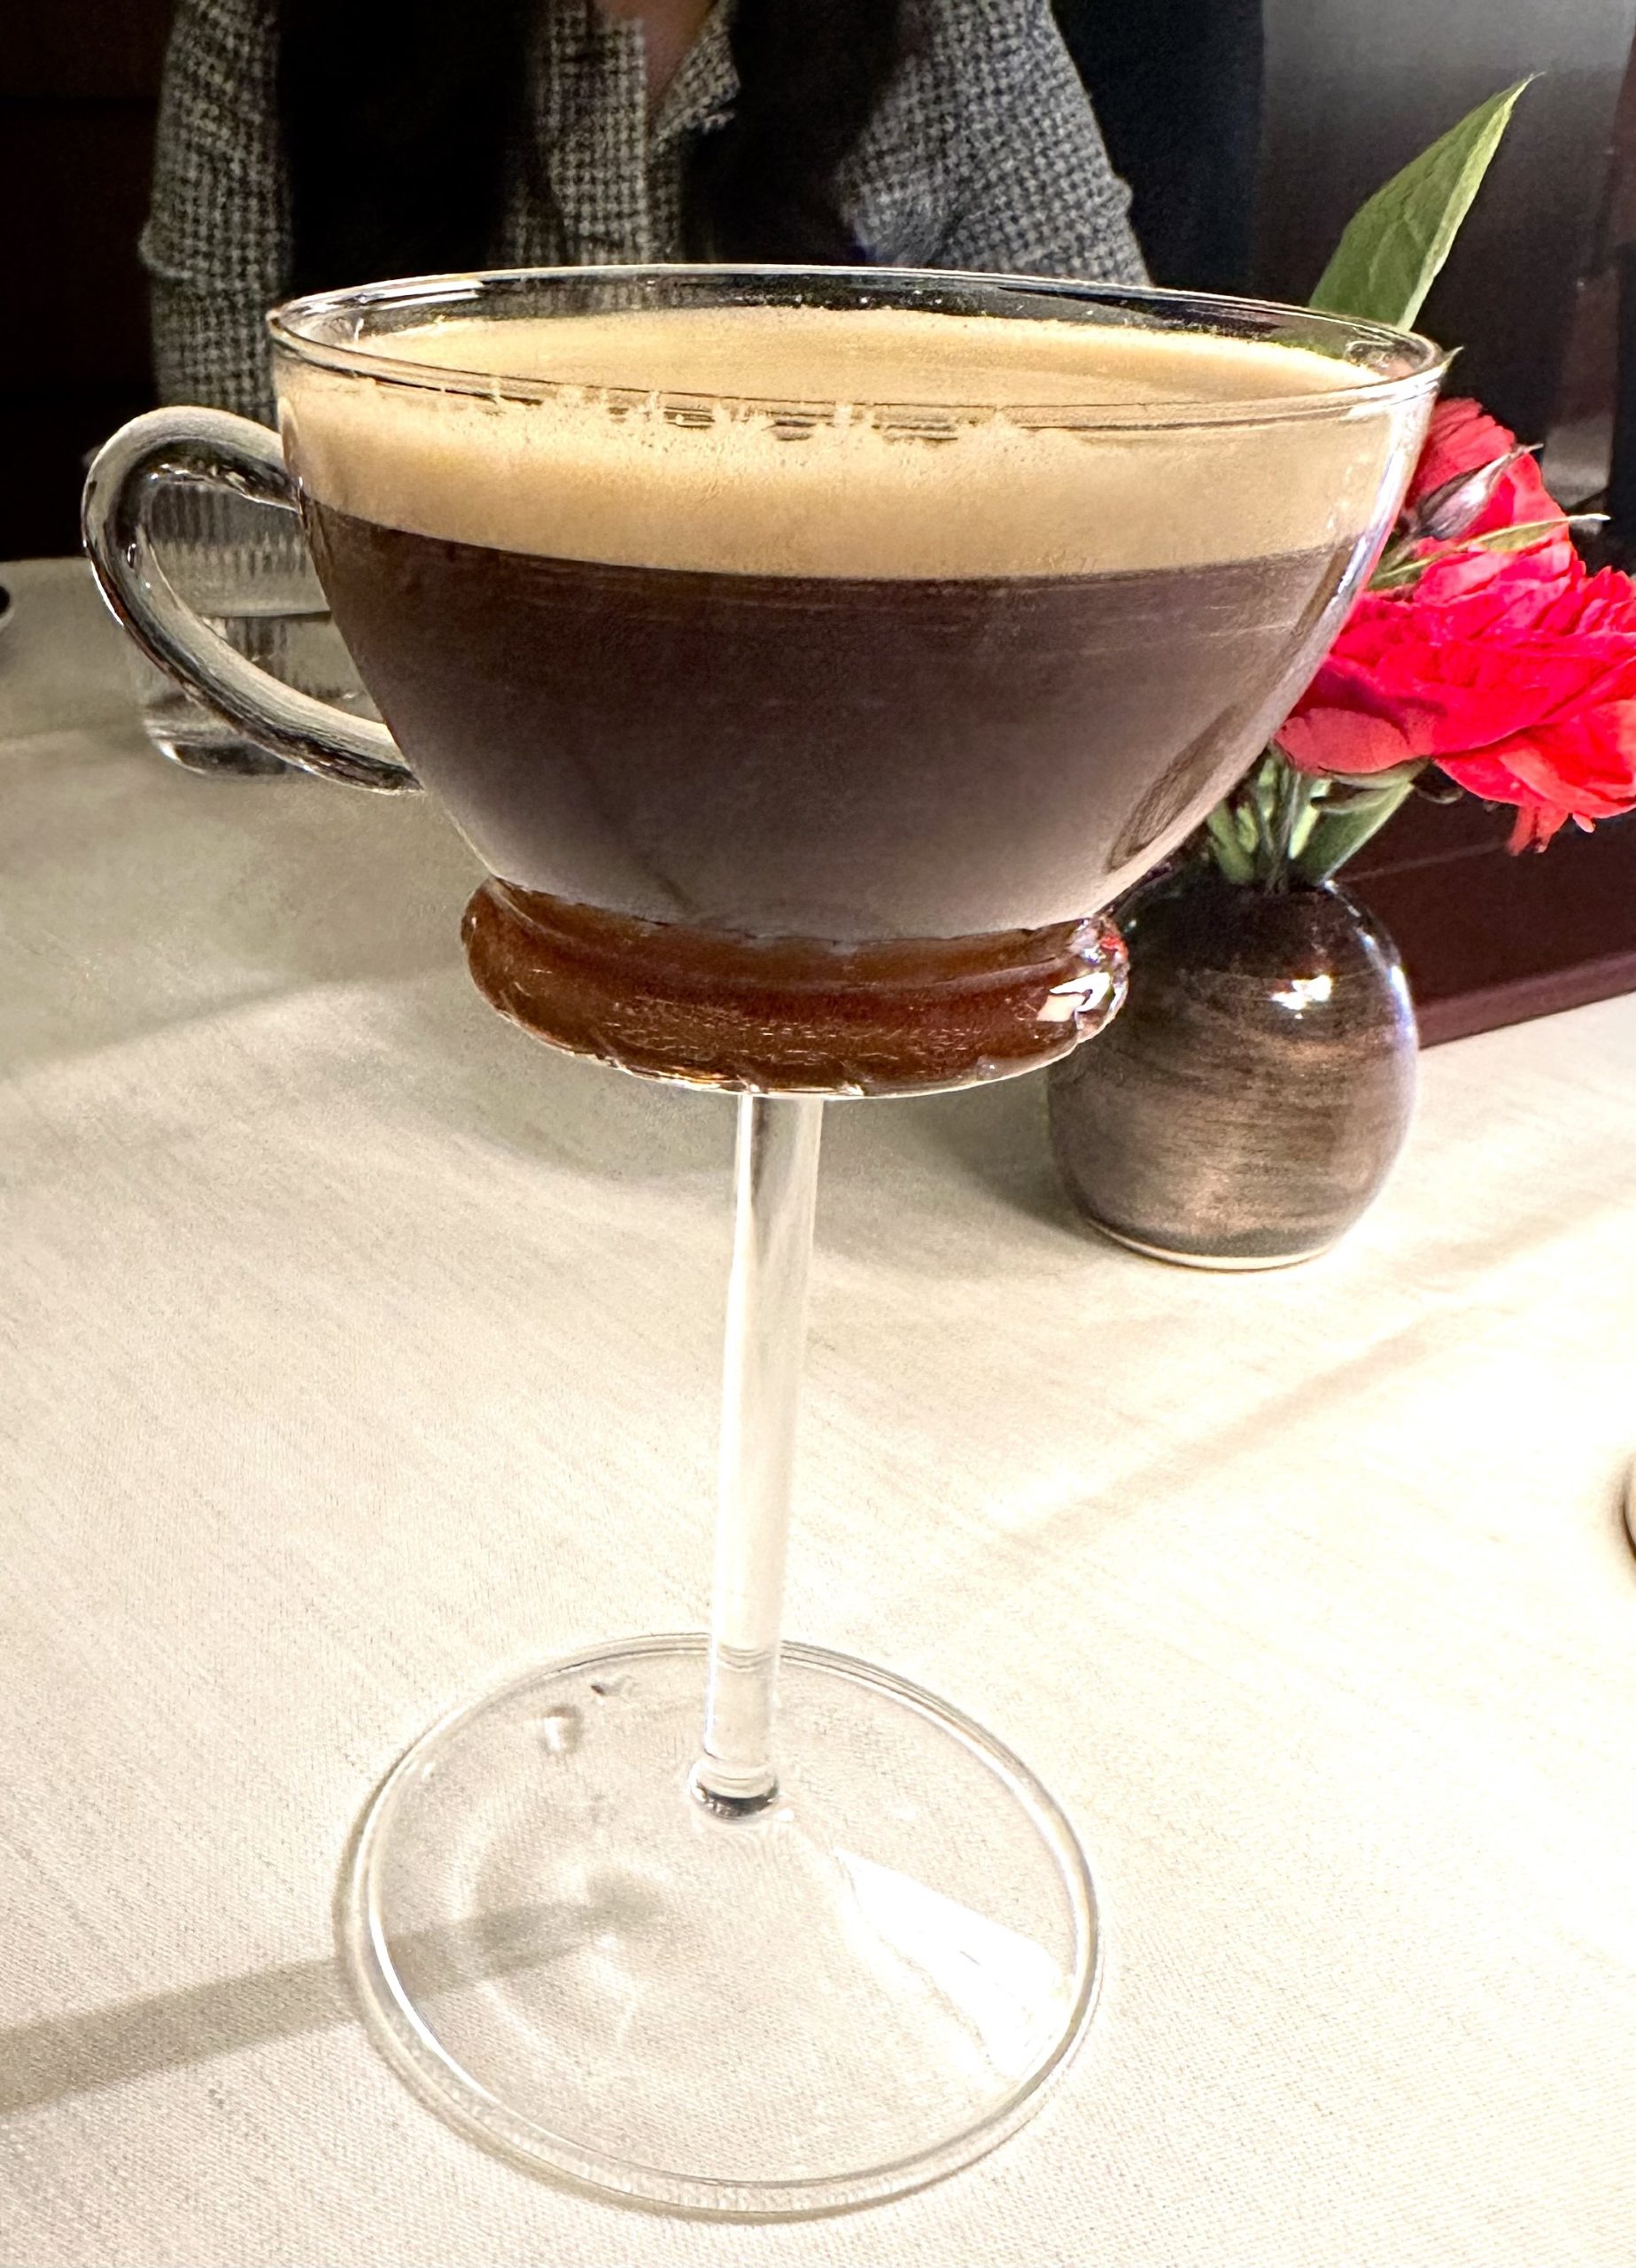 An Espresso Martini at 425 Park JeanGeorges